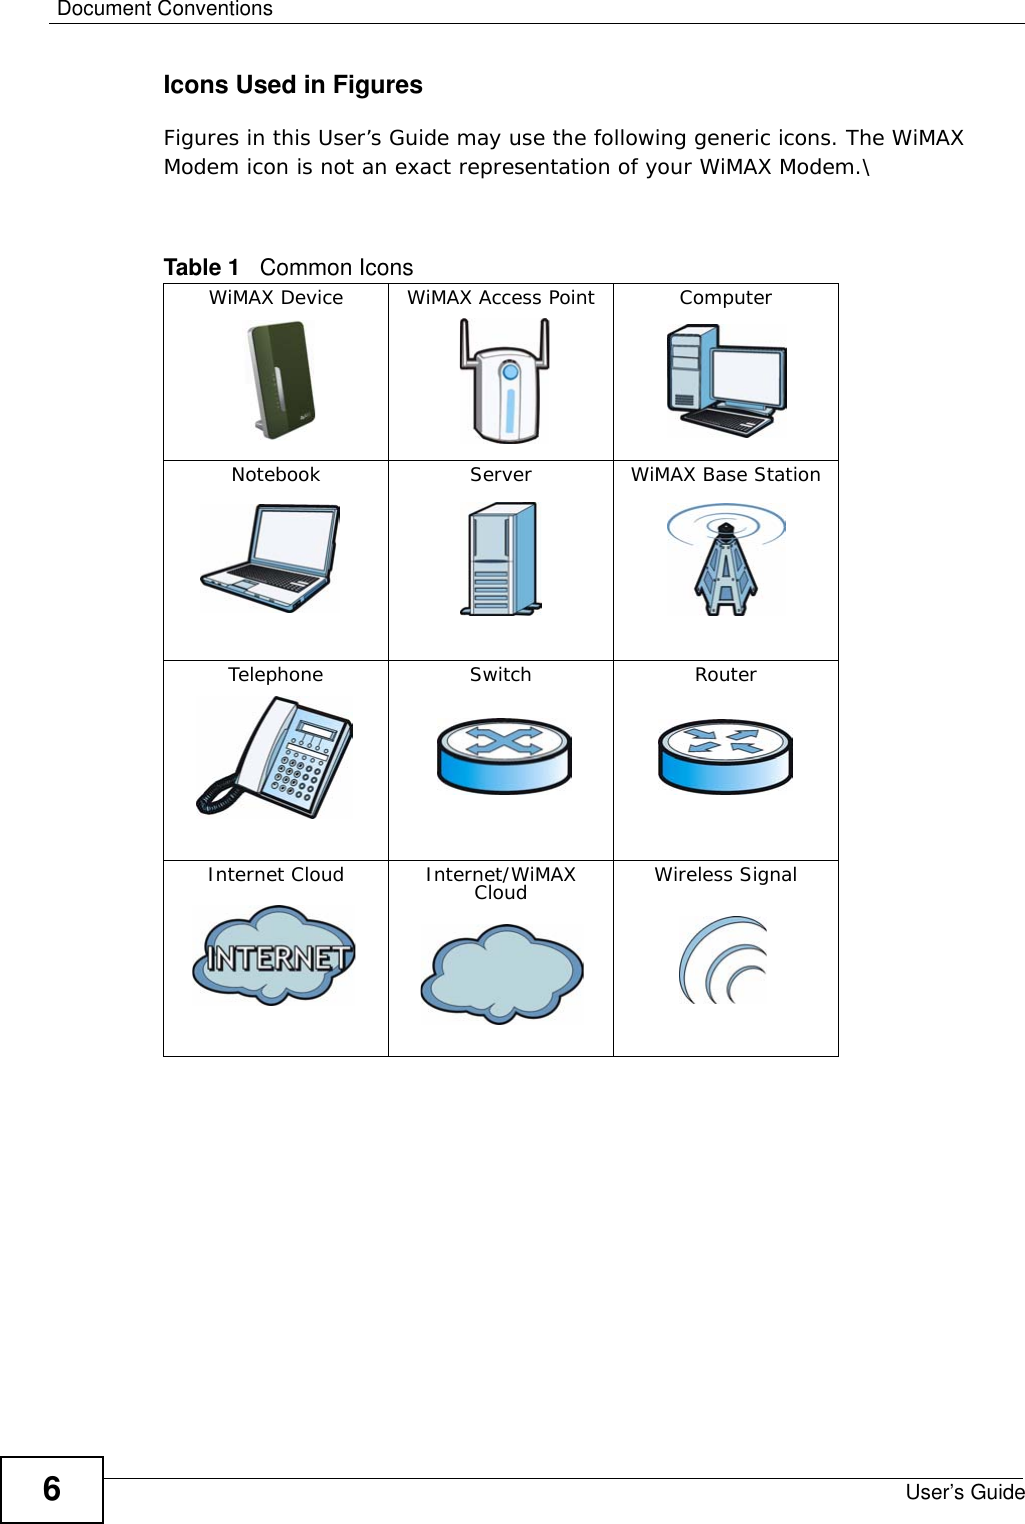 Document ConventionsUser’s Guide6Icons Used in FiguresFigures in this User’s Guide may use the following generic icons. The WiMAX Modem icon is not an exact representation of your WiMAX Modem.\Table 1   Common IconsWiMAX Device WiMAX Access Point ComputerNotebook Server WiMAX Base StationTelephone Switch RouterInternet Cloud Internet/WiMAX Cloud Wireless Signal